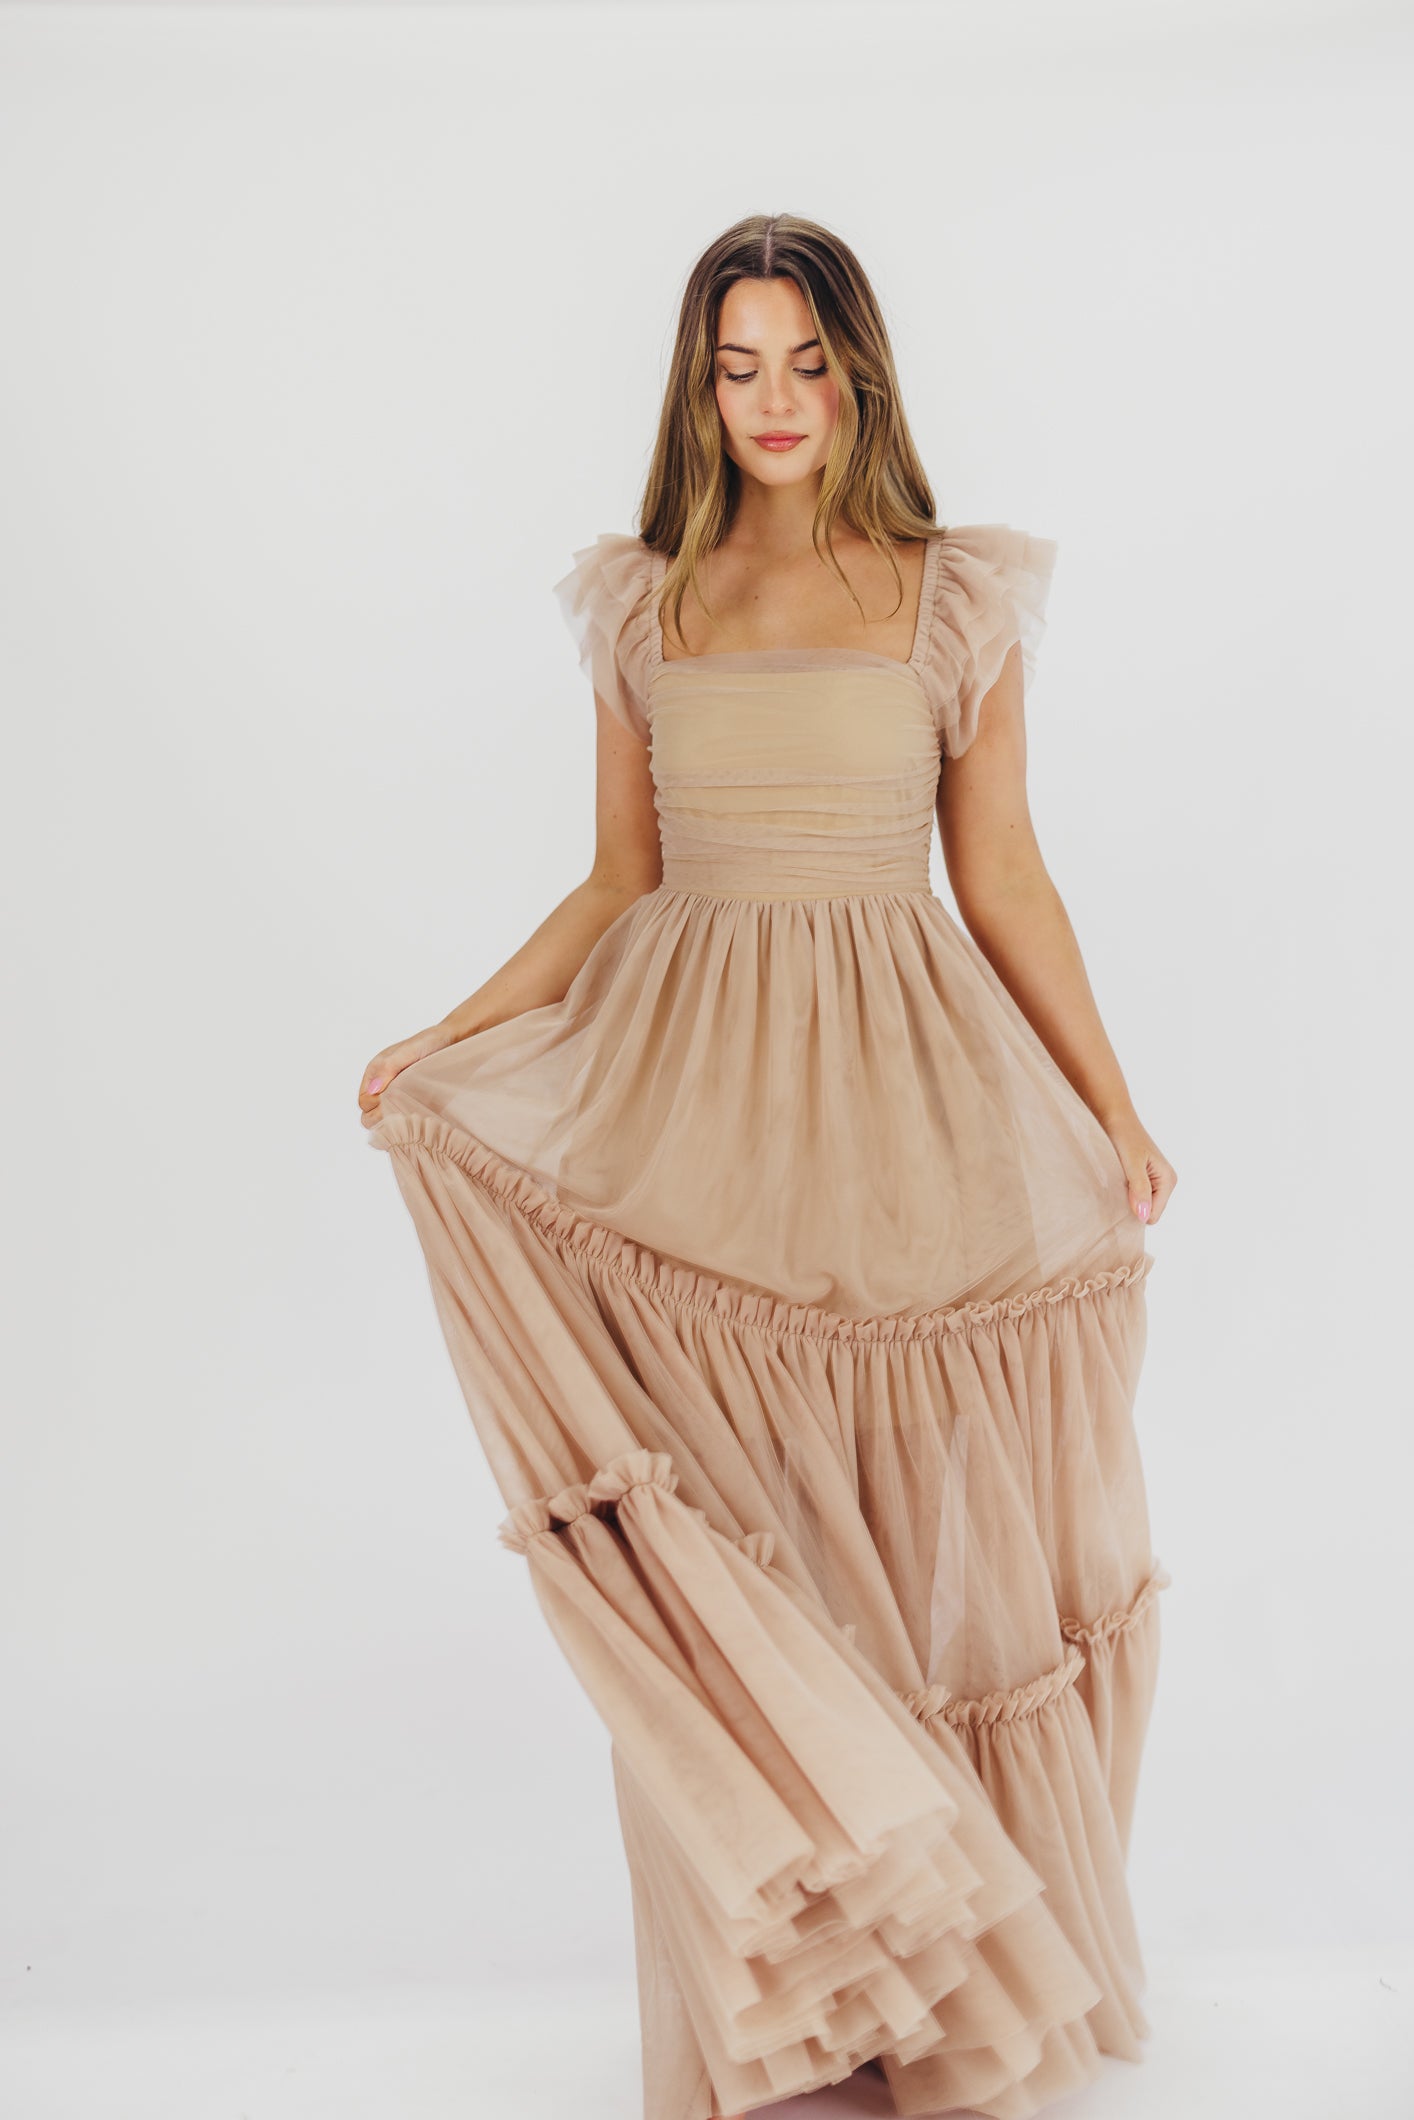 Bella Tiered Tulle Maxi Dress in Taupe - Bump Friendly & Inclusive Sizing (S-3XL) - Restocking End of Aug